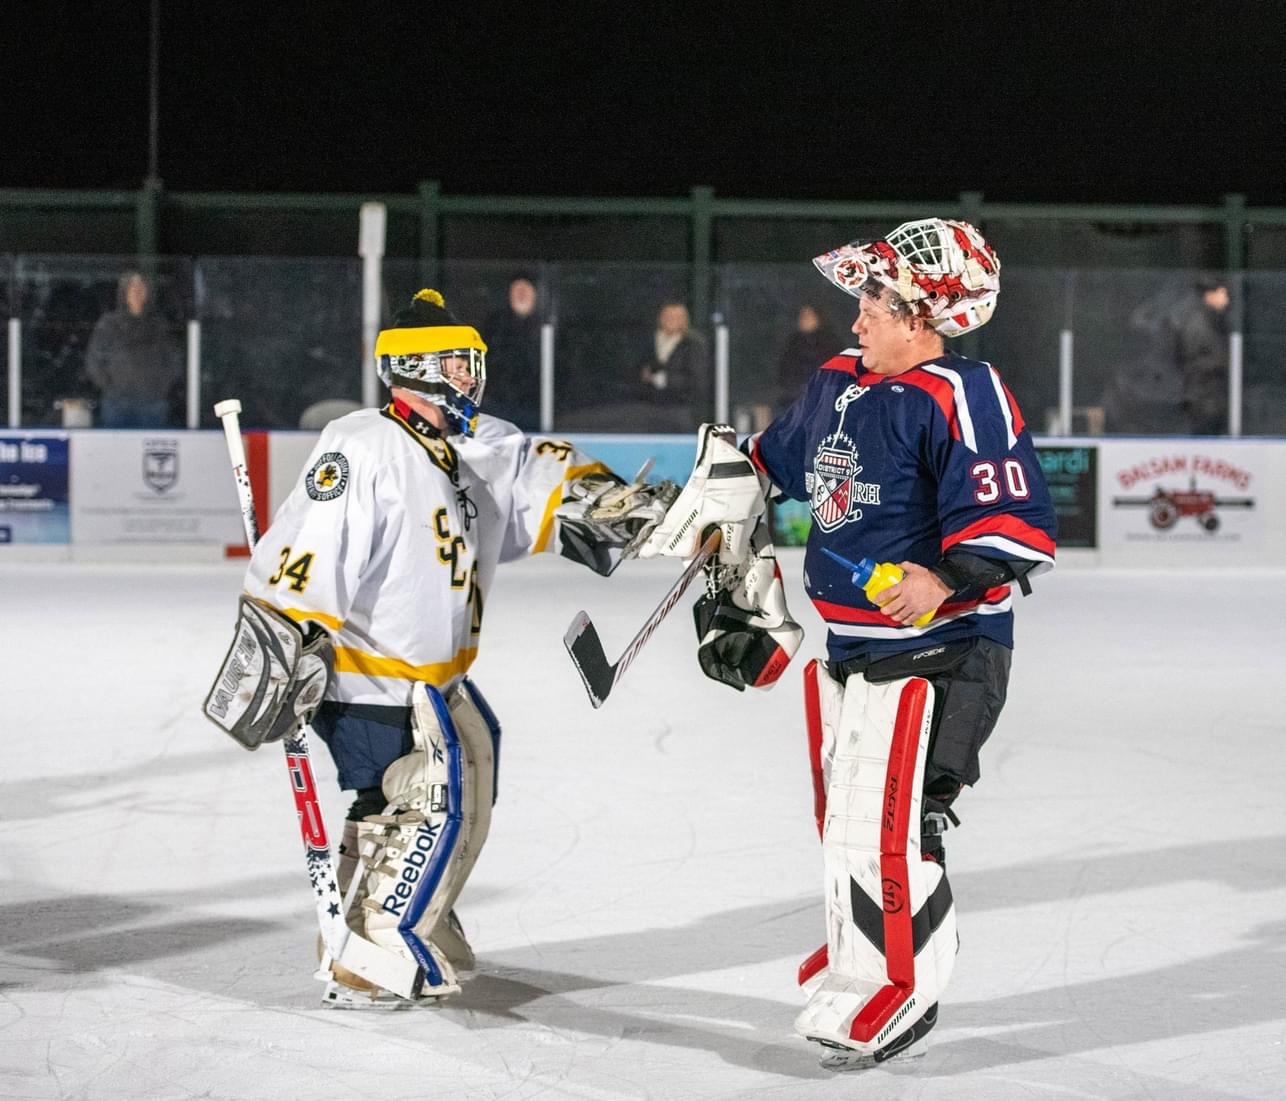 The District 9 First Responders hockey team, made up of firefighters, police officers, EMTs and ocean rescue members from East Hampton, Sag Harbor and Southampton, hosted the Suffolk County Sheriffs at Buckskill Winter Club in East Hampton on Sunday night.  PHOTOS COURTESY SUSAN KETCHAM/SCSO HOCKEY